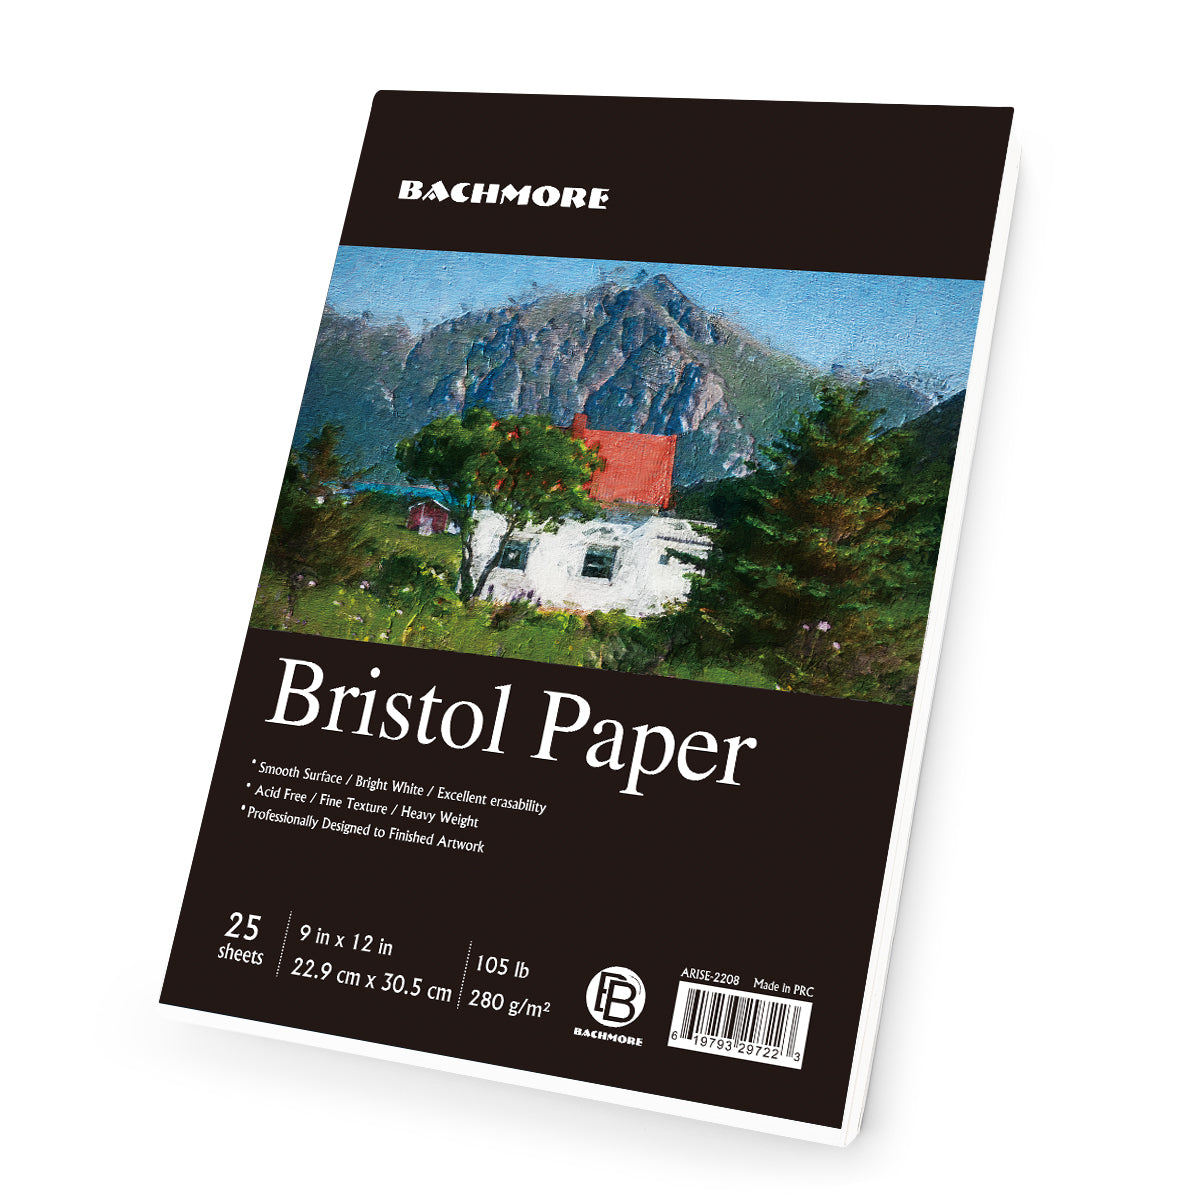 Bachmore Bristol Paper 9 X 12 inches Smooth Pad 105lb/280gsm 25 Sheets –